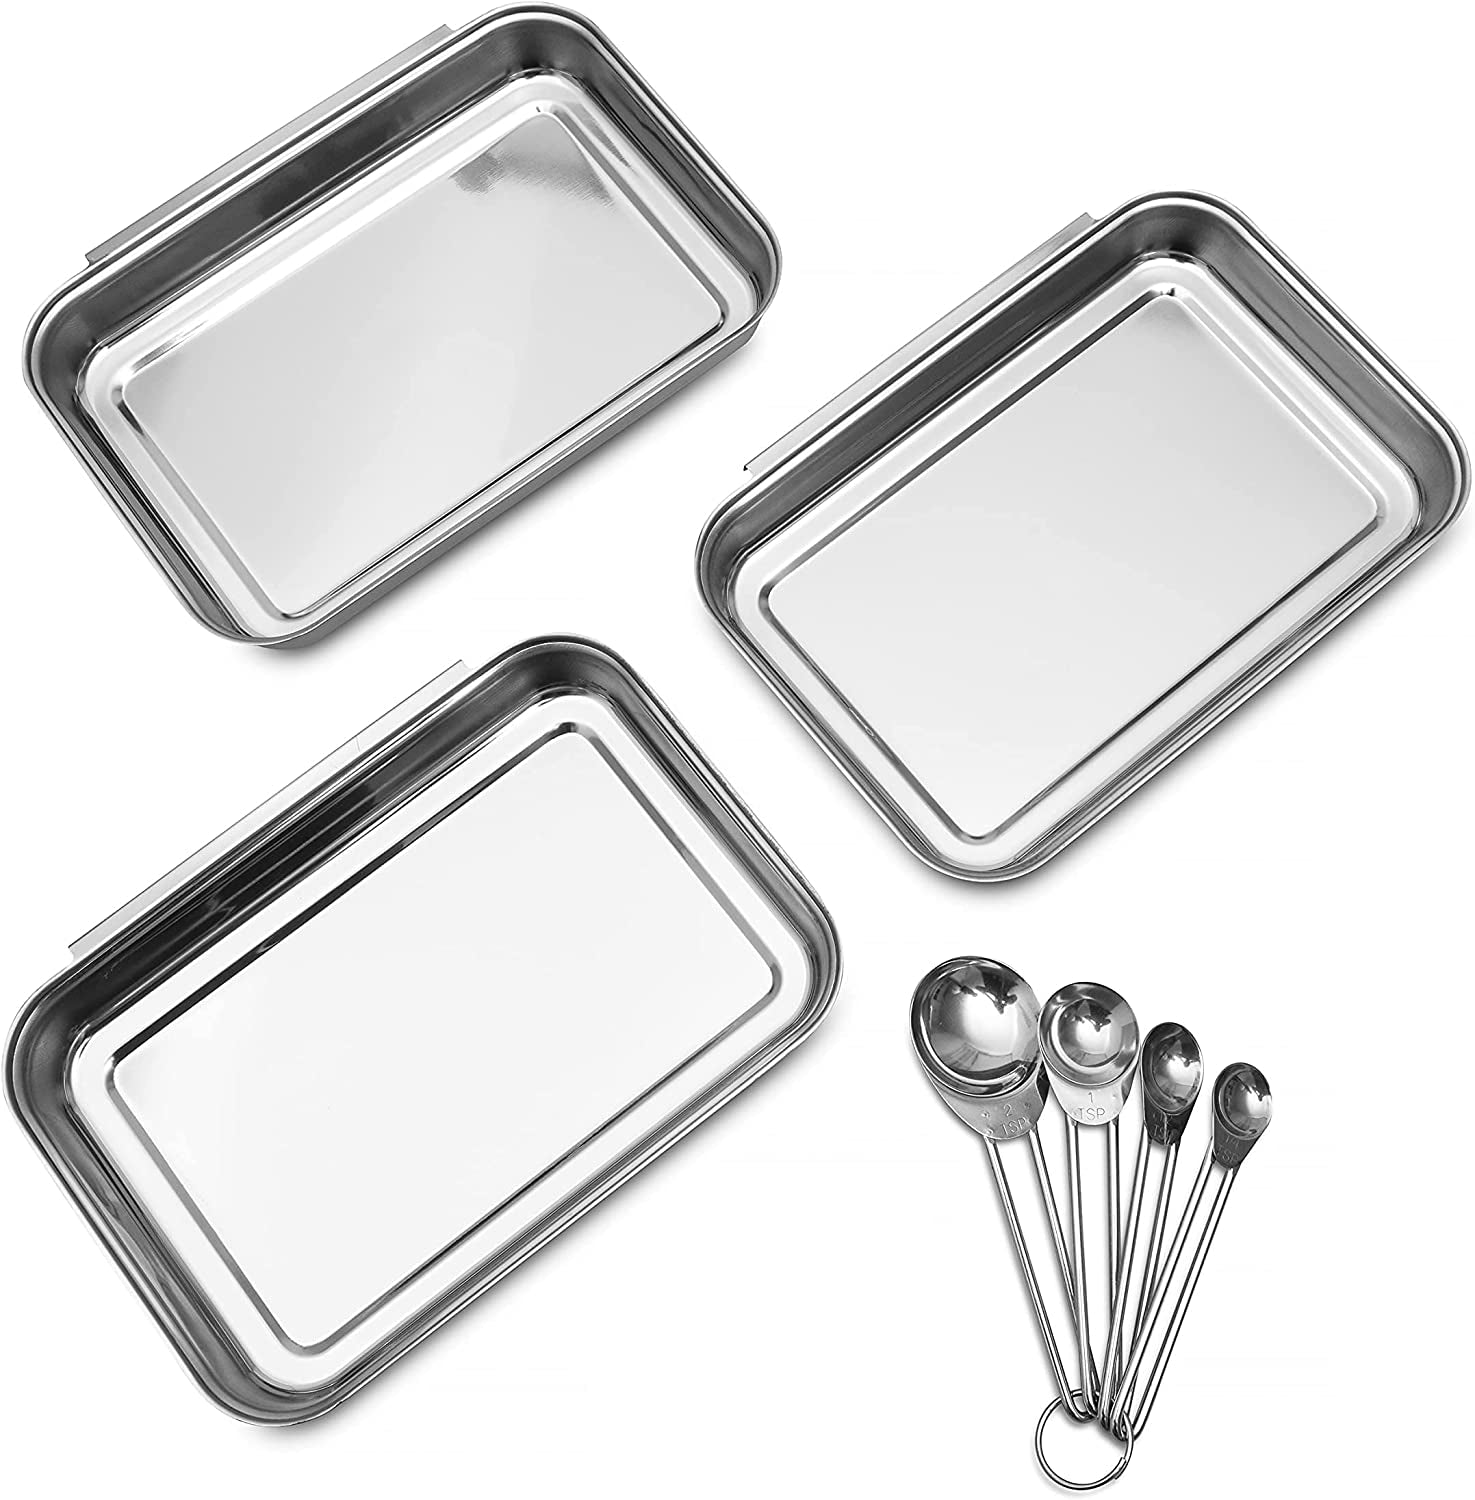 3 Piece Breading Tray Set - Stainless Steel Crumbing Coating Pans with Overlapping Rims - Preparing Dredging Bread Crumb Dishes; Panko, Schnitzel and Fish - with 4 Piece Measuring Spoons